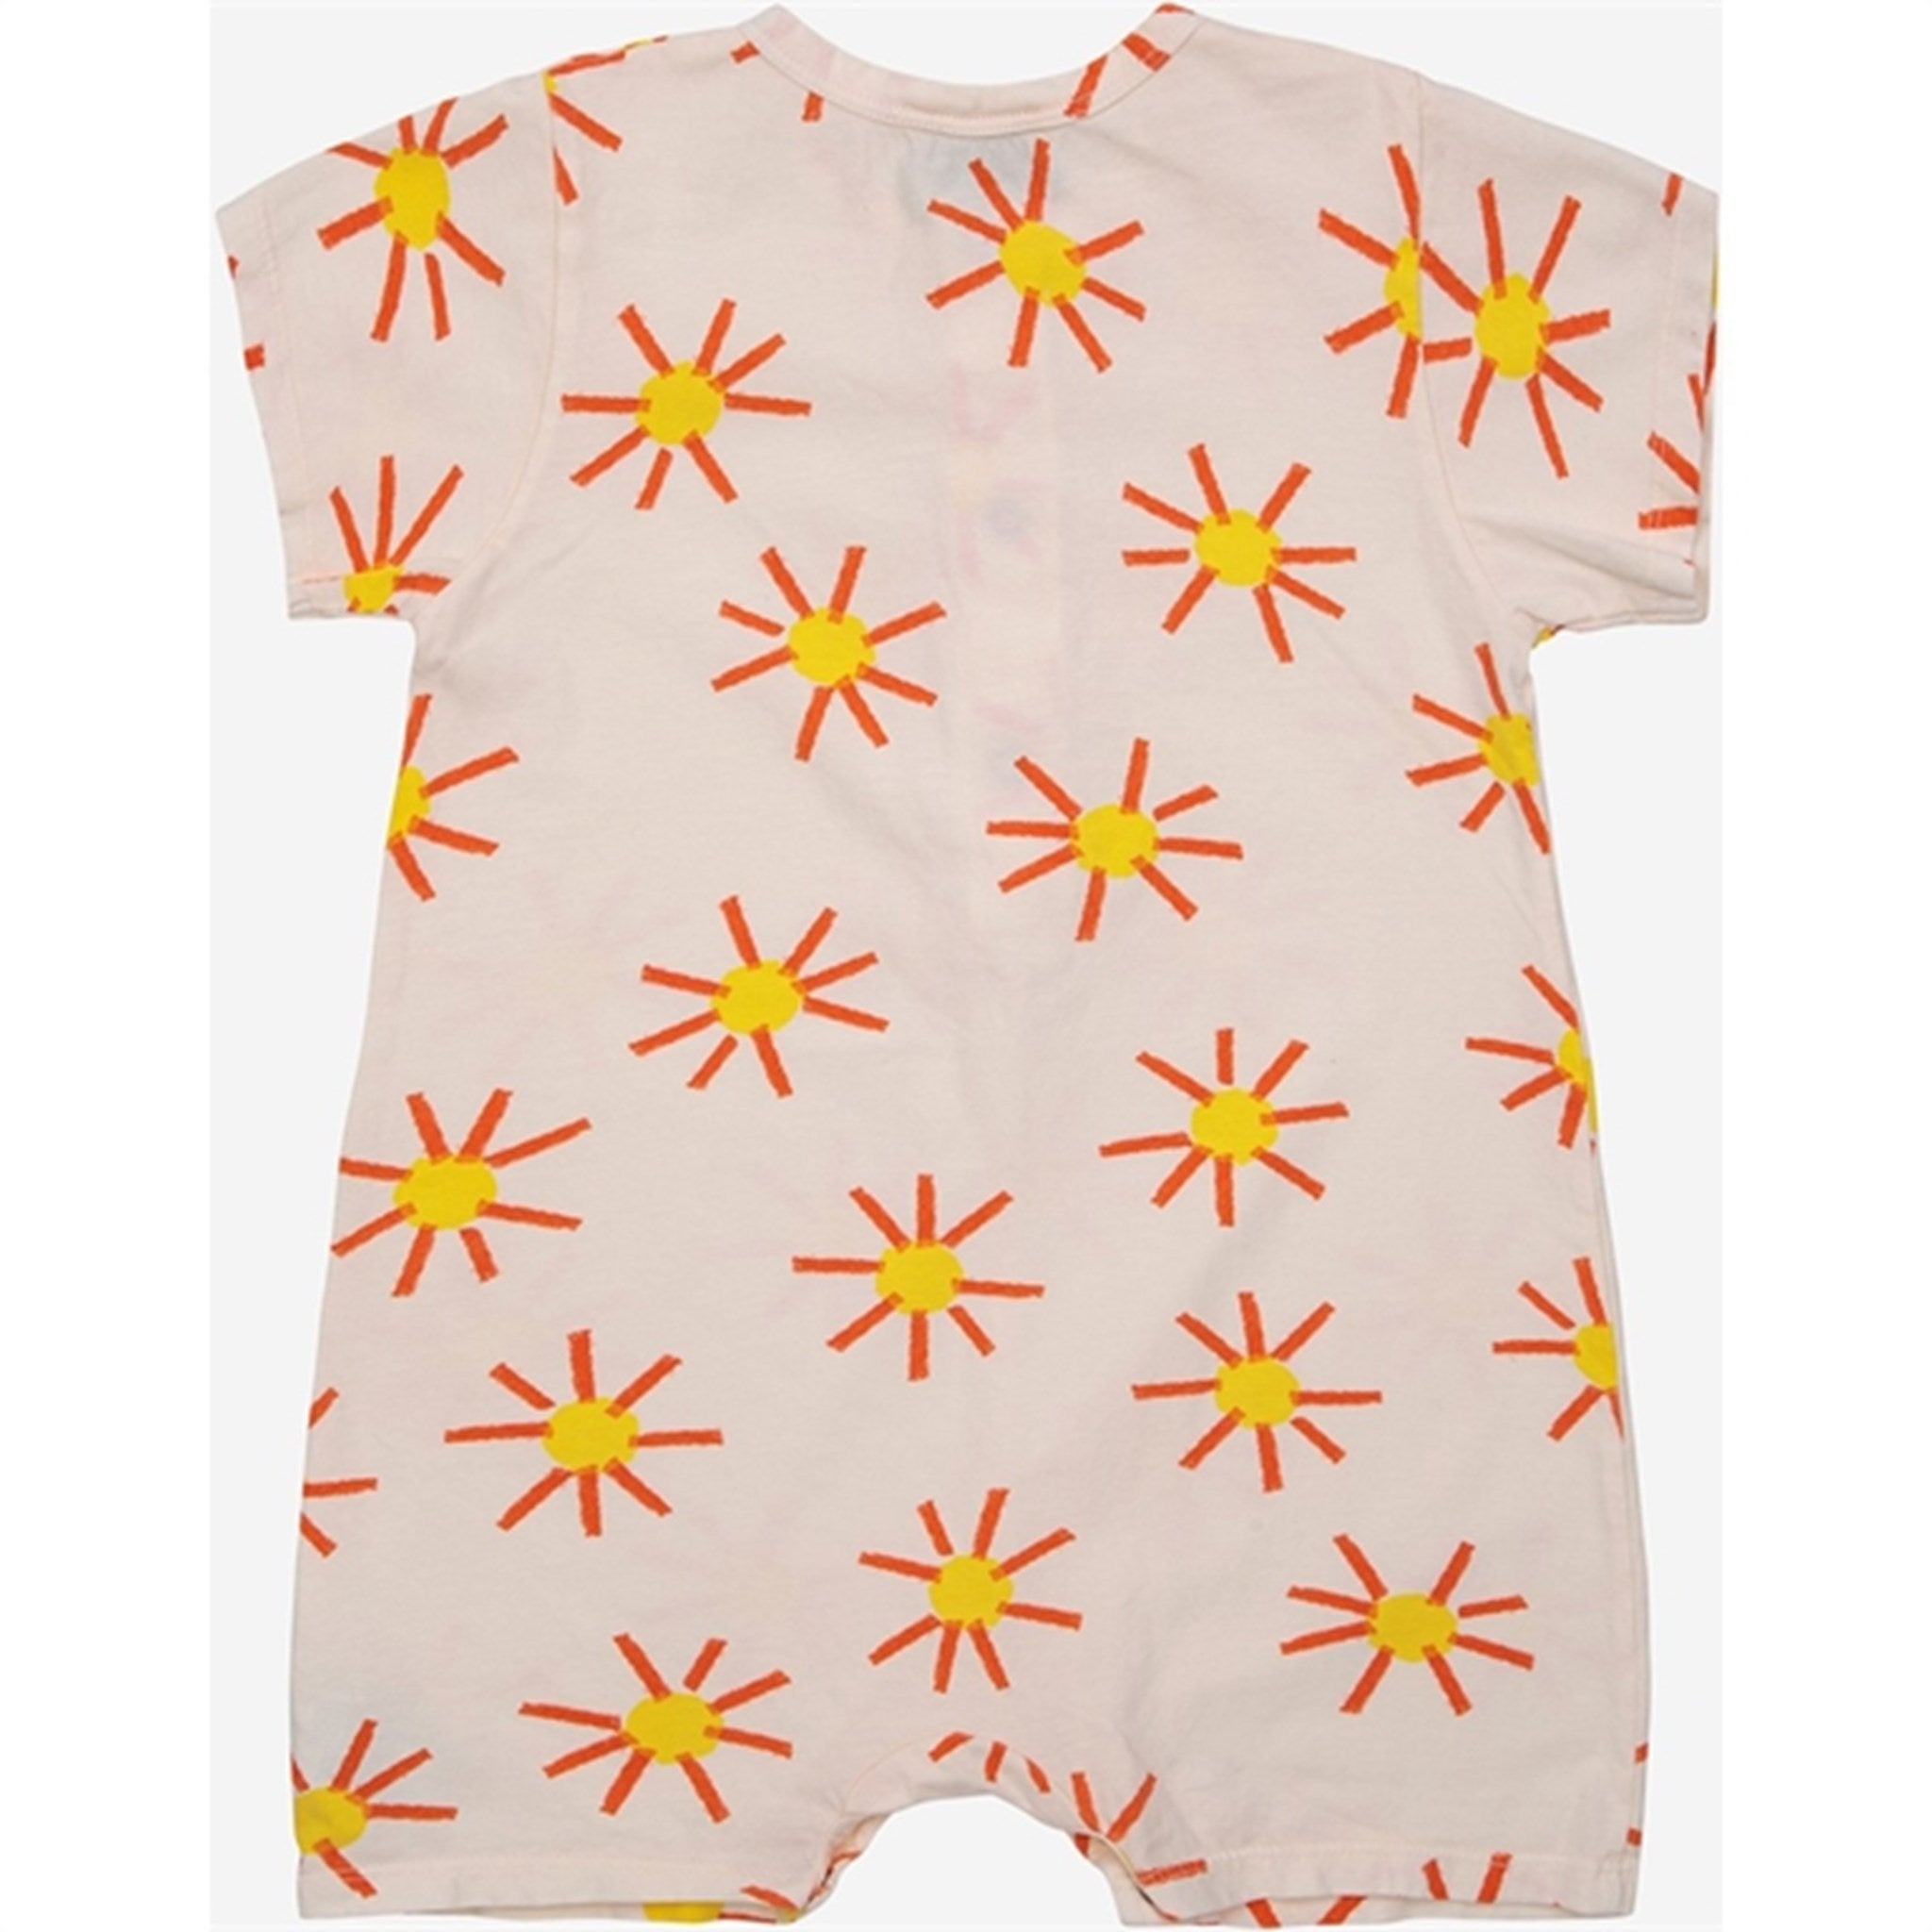 Bobo Choses Baby Sun All Over Playsuit Short Sleeve Offwhite 2